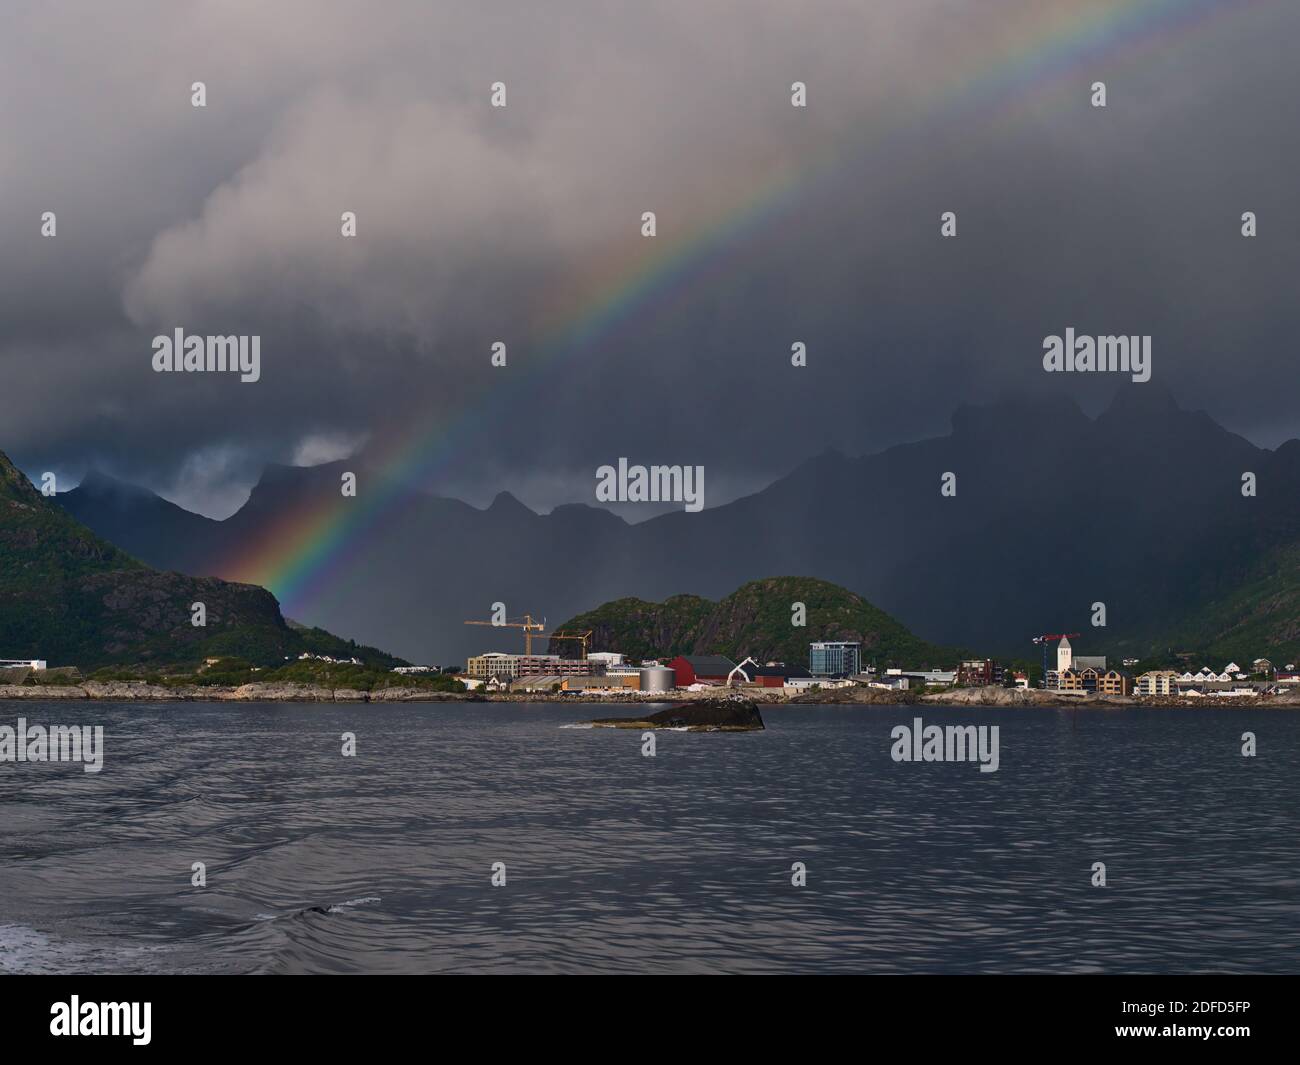 Stunning strong and colorful rainbow above fishing village Svolvær on the coast of Austvågøya island, Lofoten, Norway with rugged mountains and clouds. Stock Photo